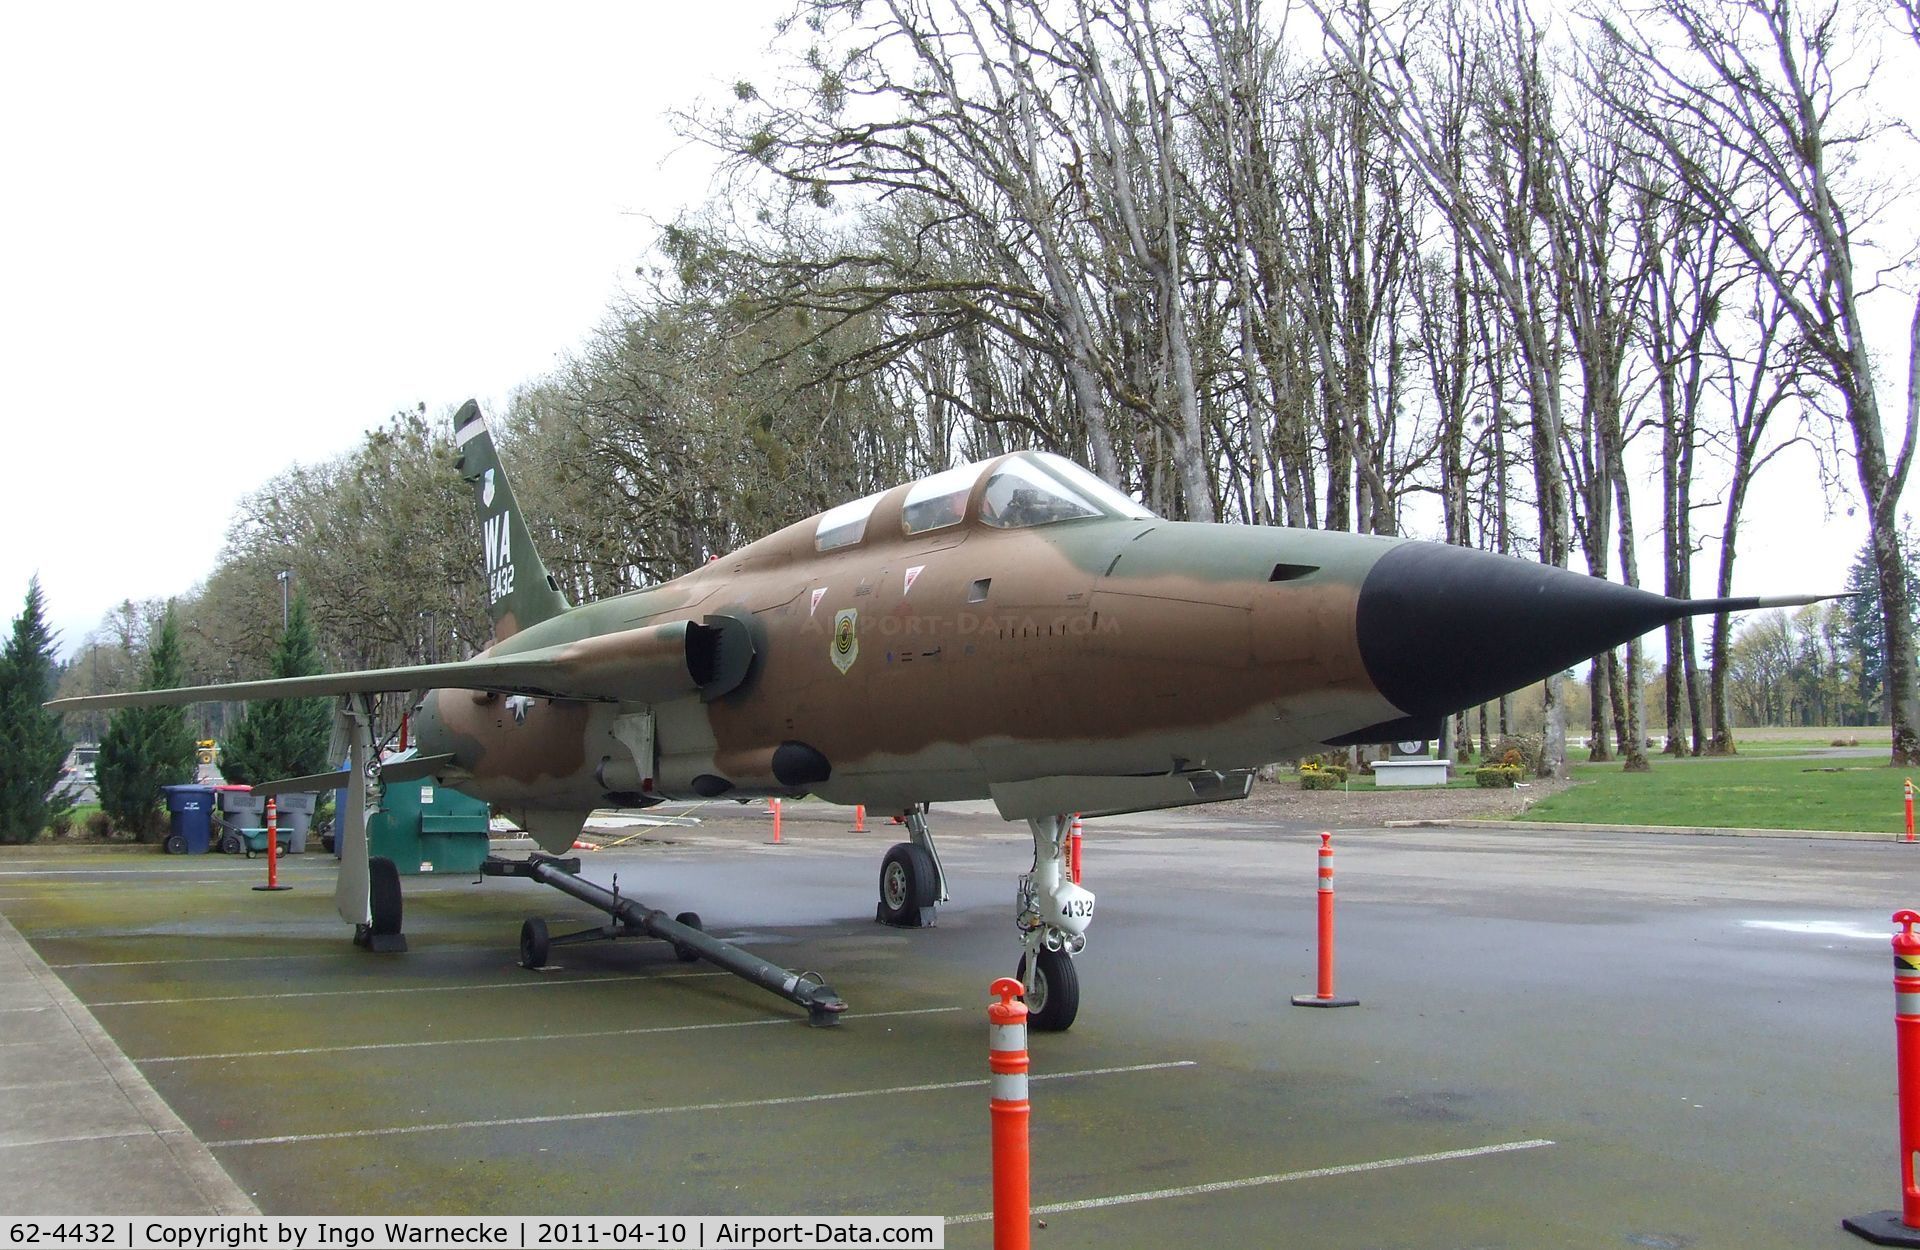 62-4432, 1962 Republic F-105G Thunderchief C/N F21, Republic F-105G Thunderchief at the Evergreen Aviation & Space Museum, McMinnville OR